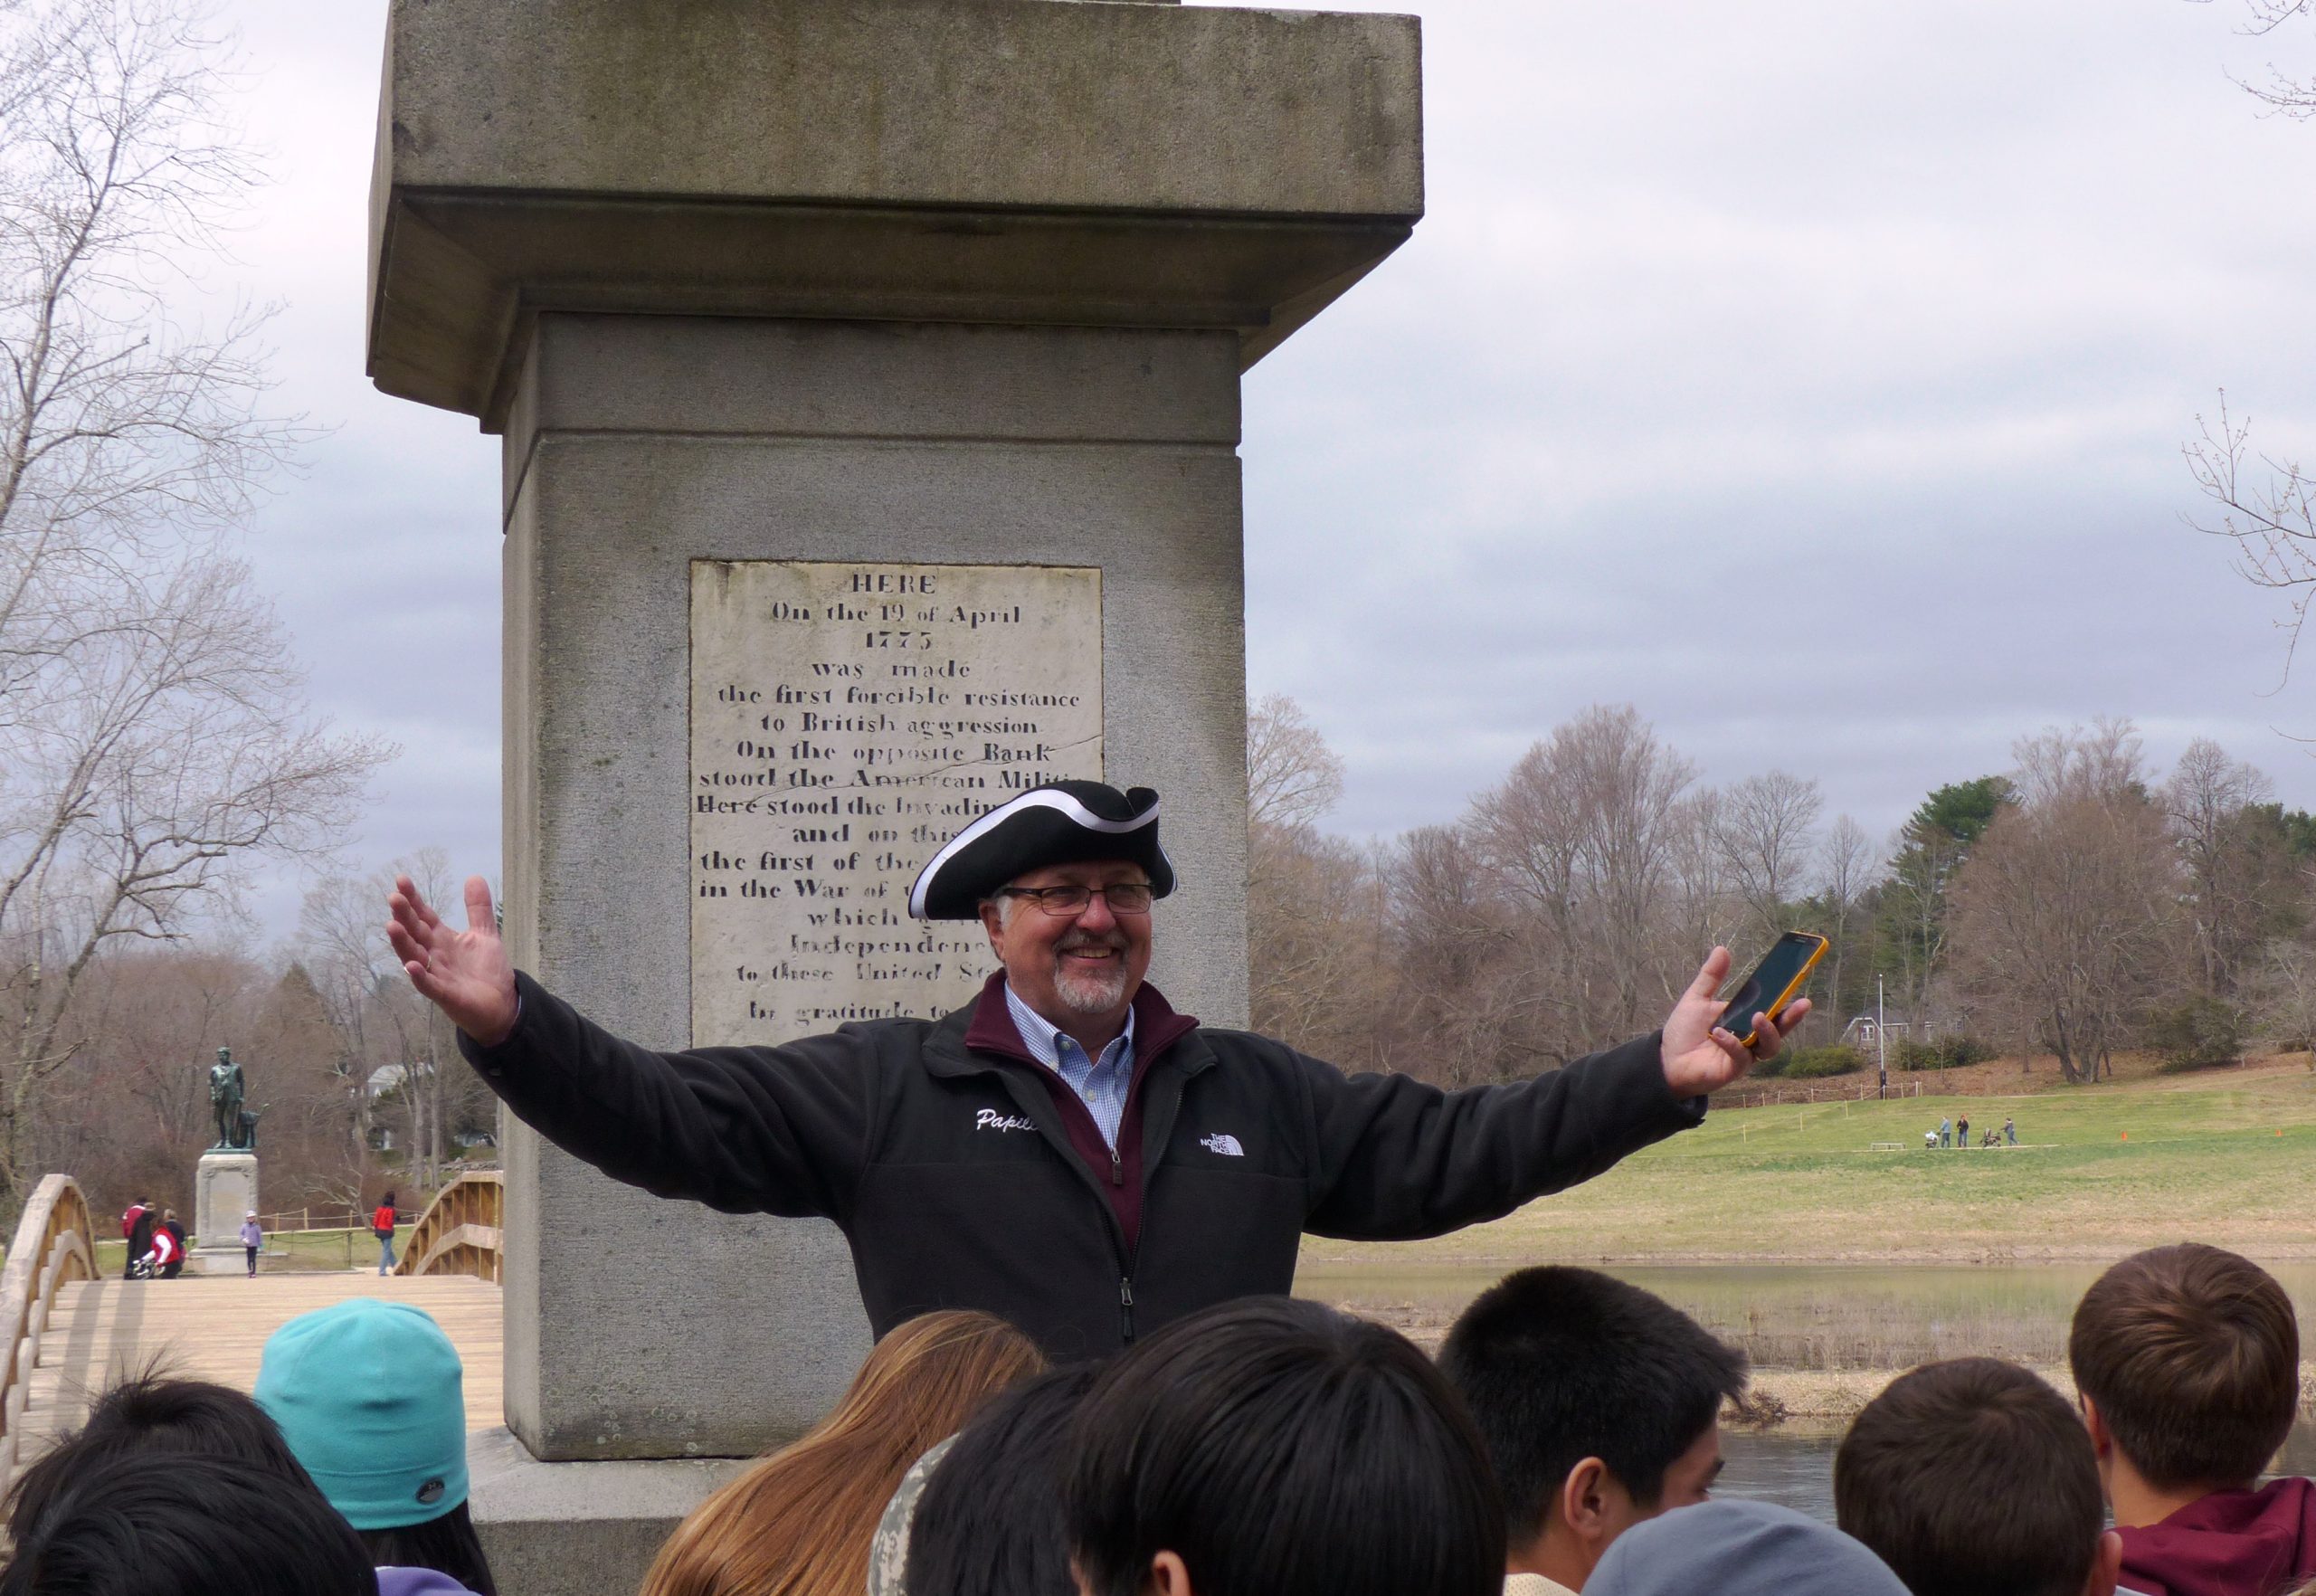 Educational tour guide giving a speech to students in front of Gary Old North Bridge in Concord, MA